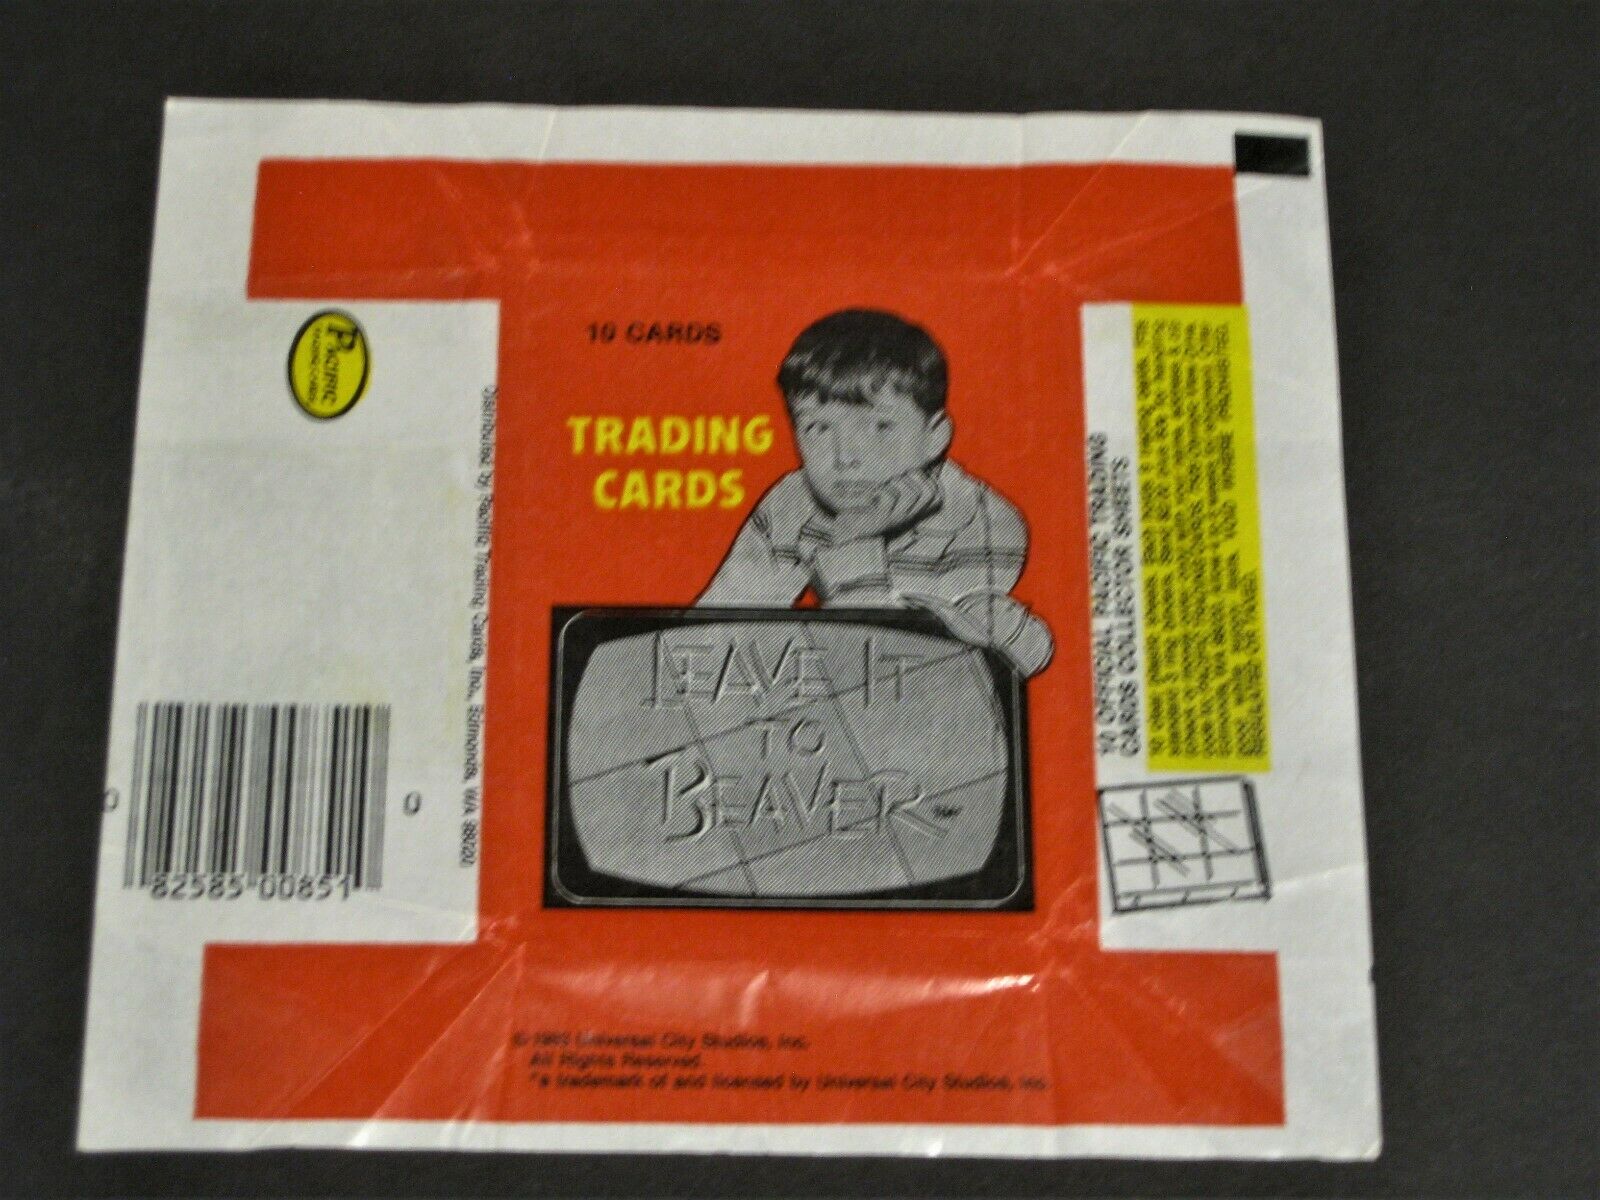 Leave It To Beaver © 1983 Pacific Original Wax Card Wrapper